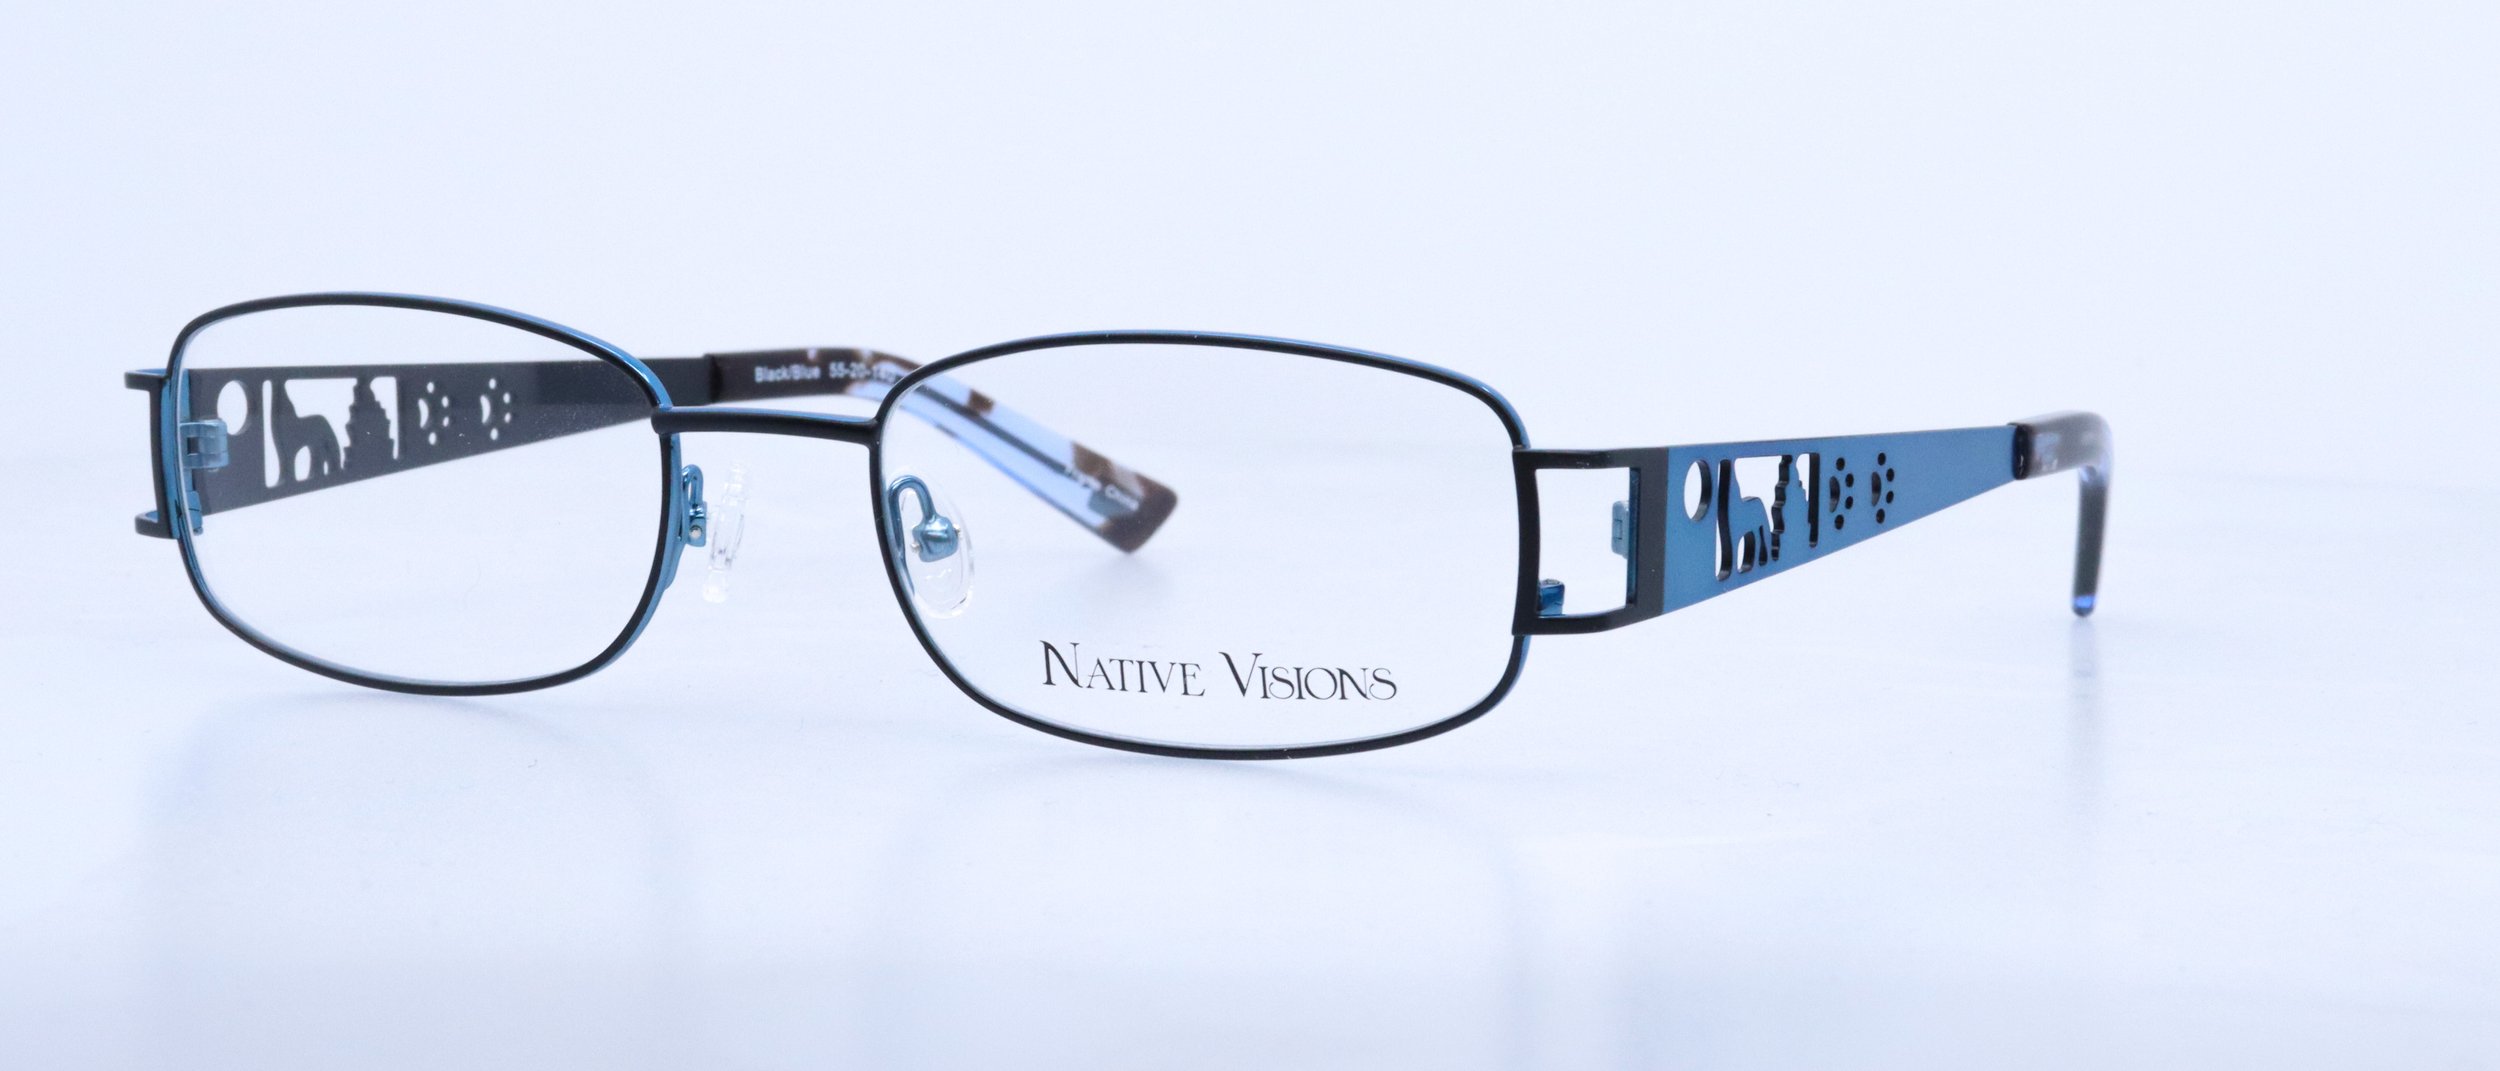  Coyote Moon by Virgil "Smoker" Marchand: 55-20-140, Available in Black/Blue, Black/Turquoise or Black/Brown 